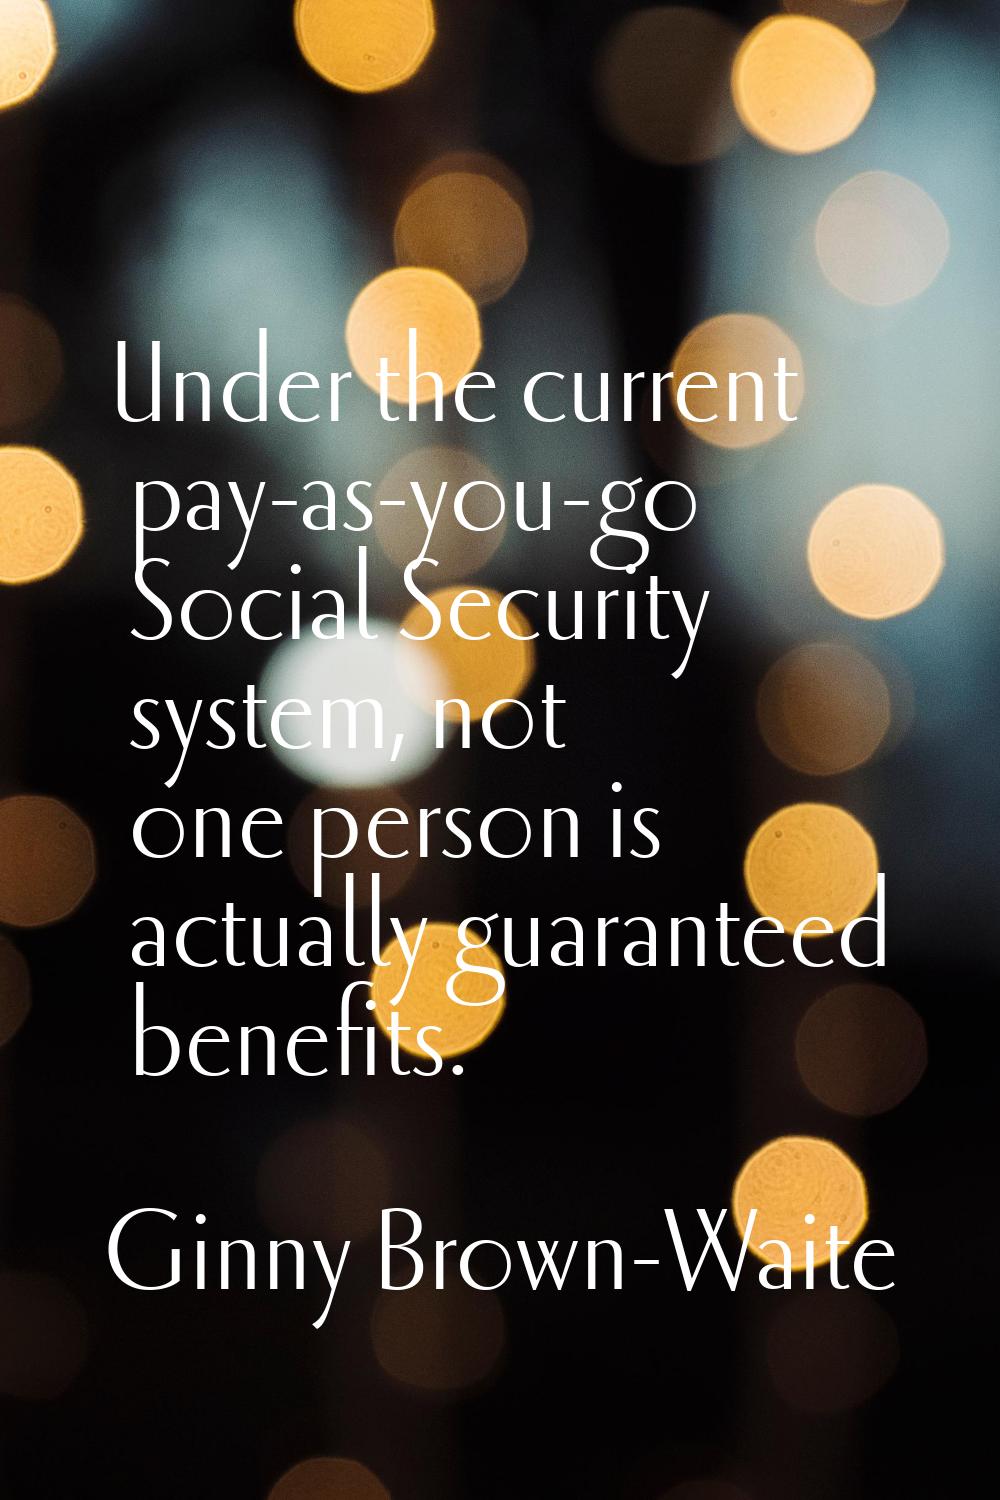 Under the current pay-as-you-go Social Security system, not one person is actually guaranteed benef